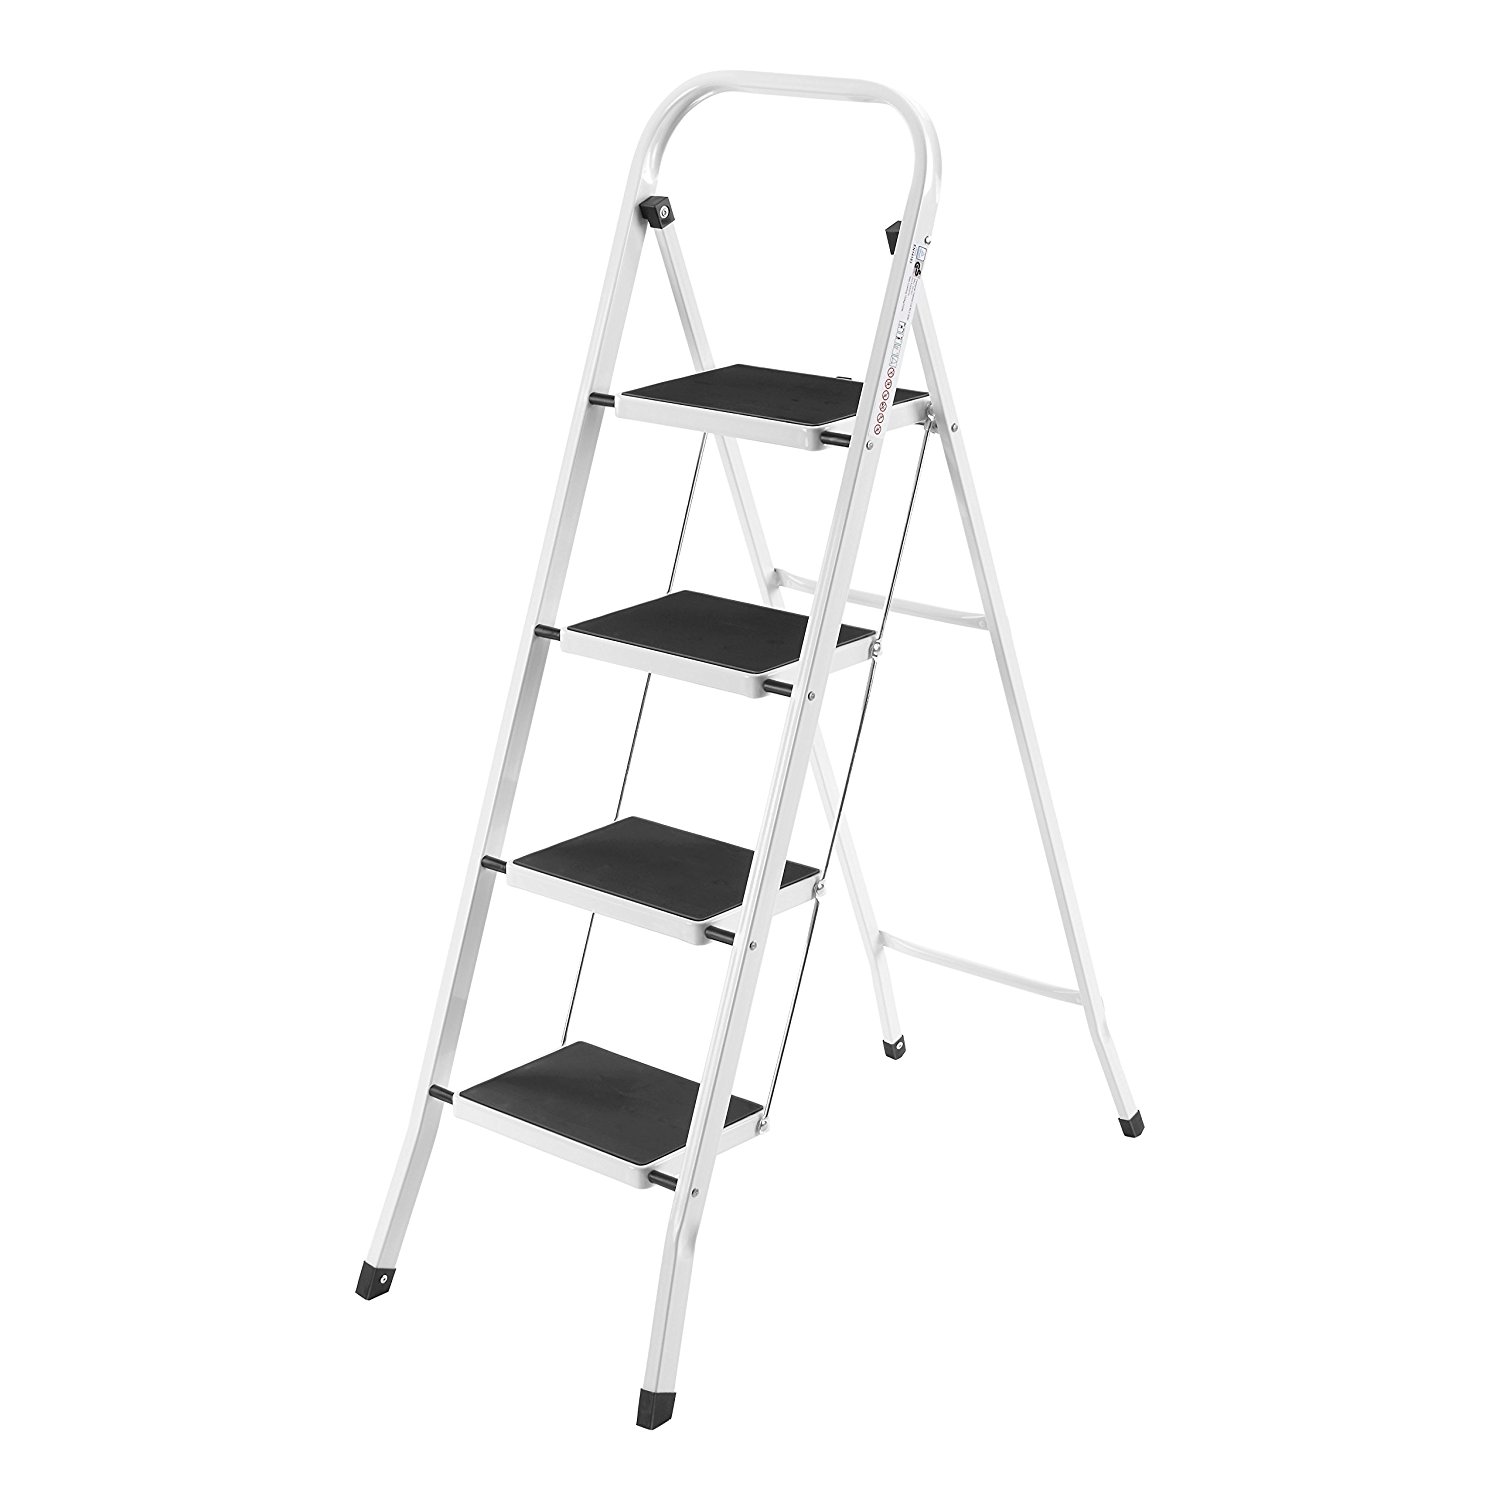 A step ladder, with 4 steps